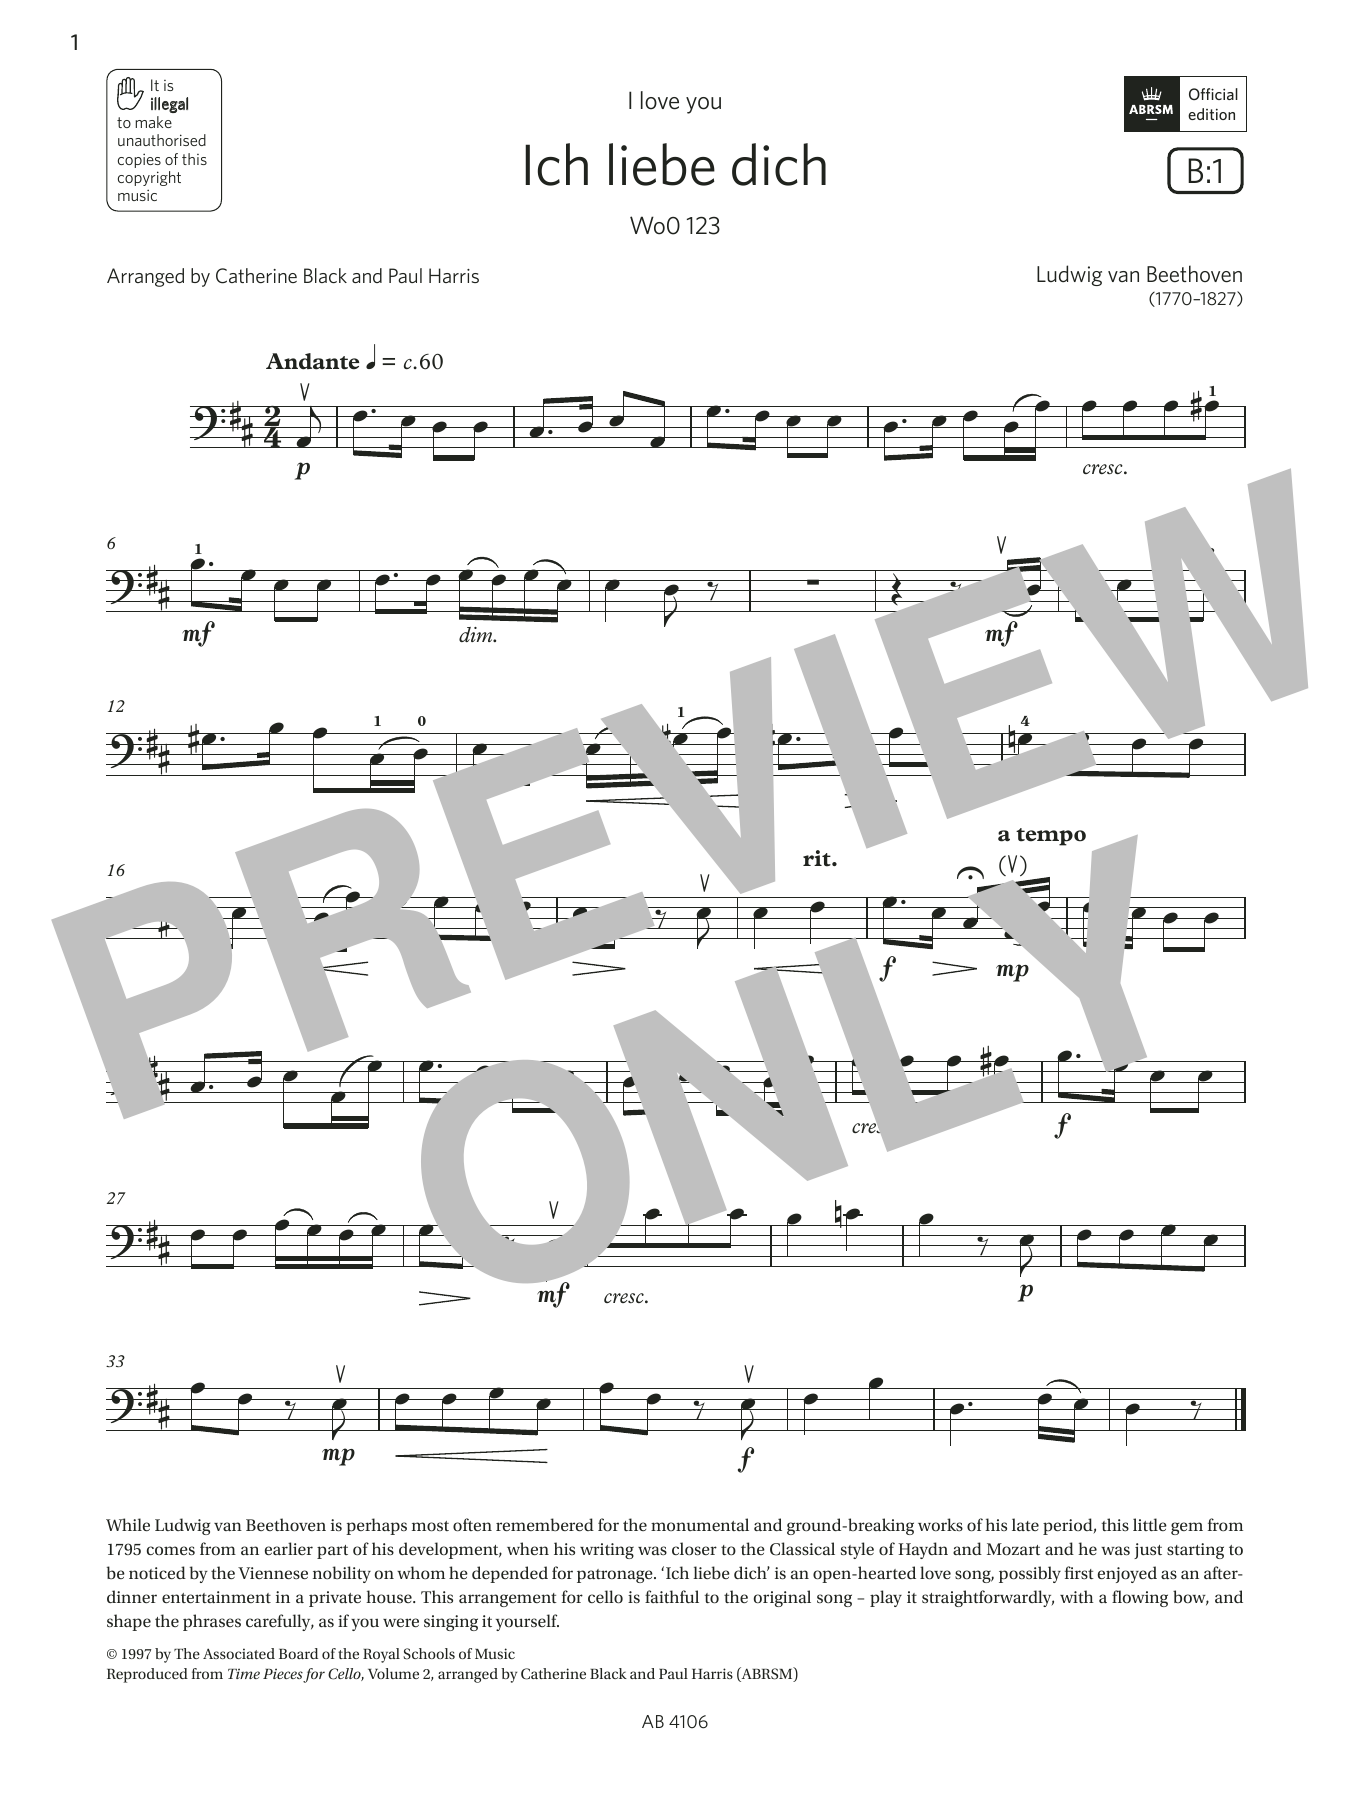 Download Ludwig van Beethoven Ich liebe dich (Grade 3, B1, from the A Sheet Music